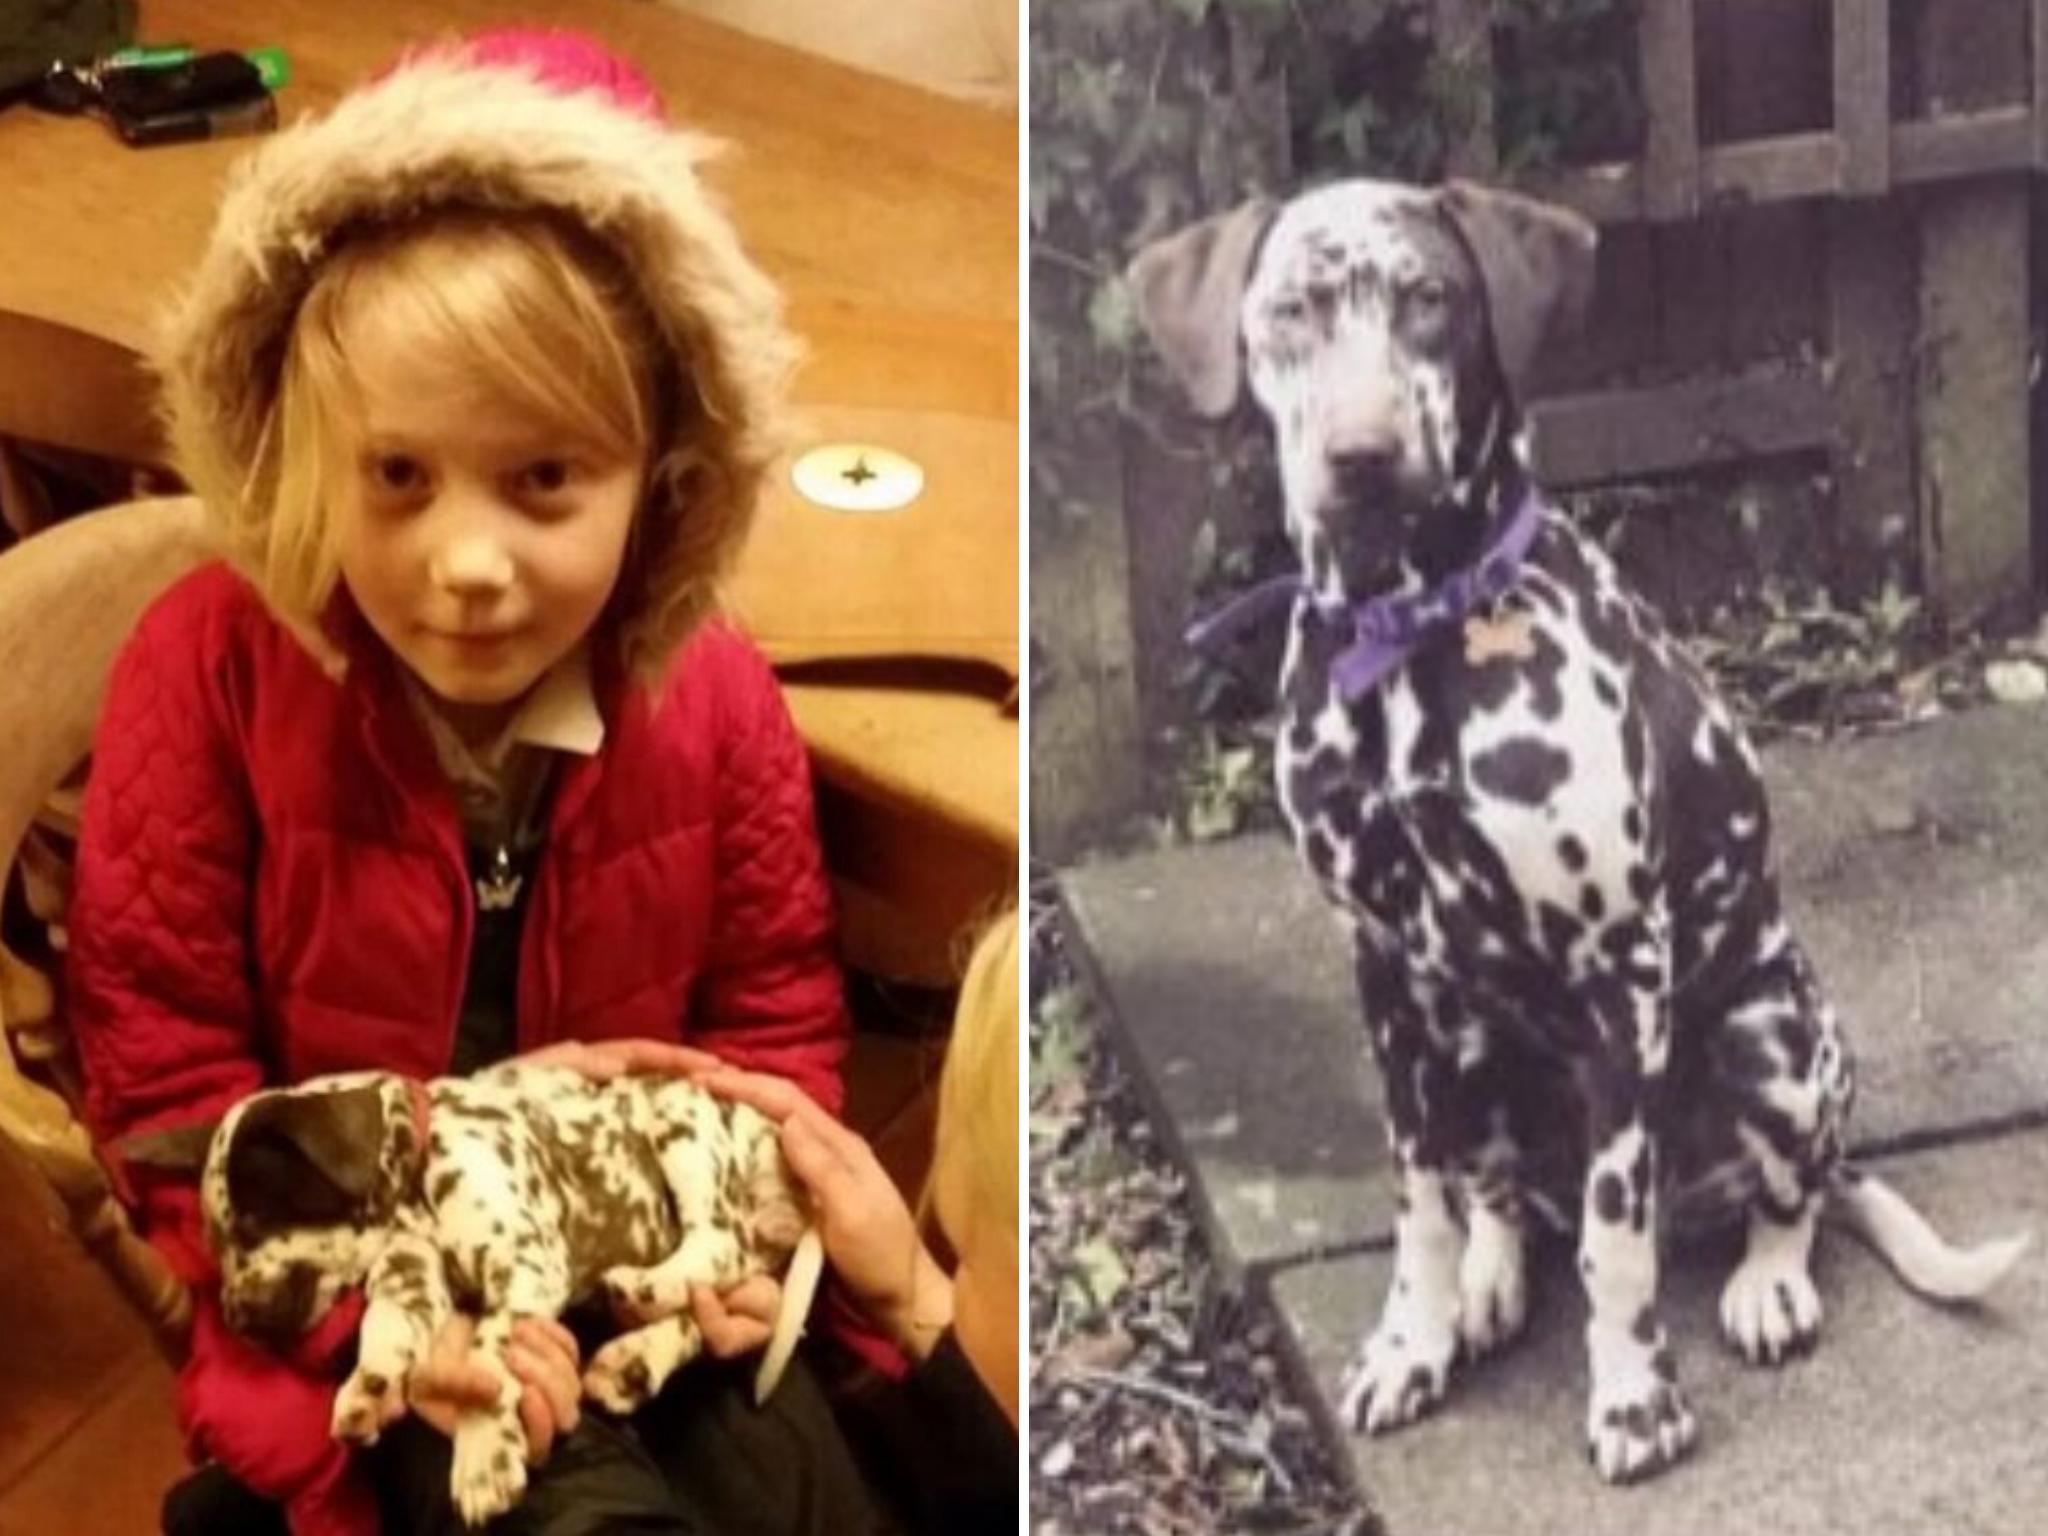 Twelve-year-old Chloe Hopkins' autism therapy dog Lottie was stolen from her family's home in Peatling Parva, Leicestershire, on 1 December, 2019